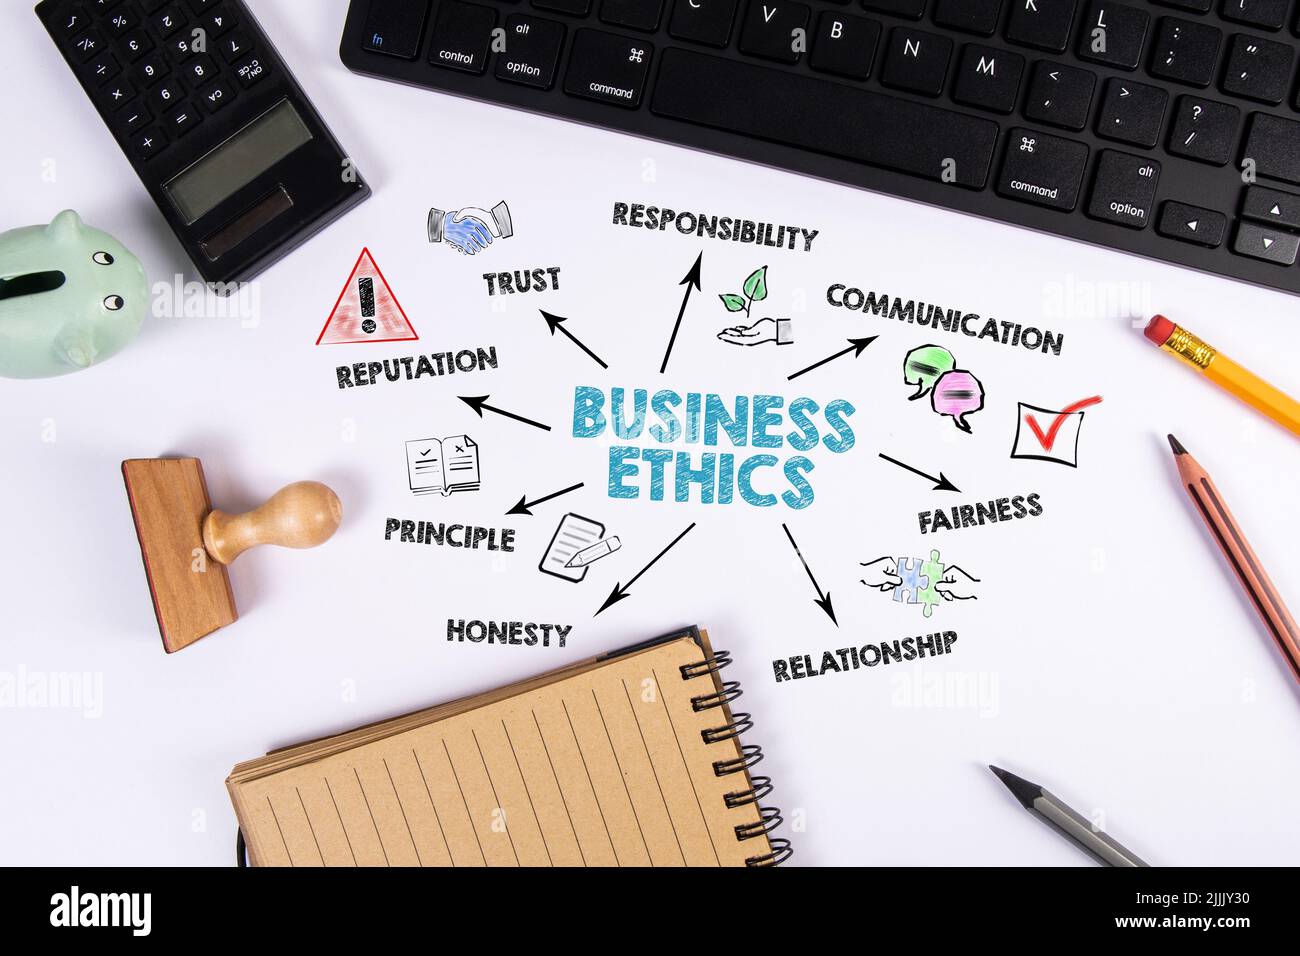 Business Ethics. Trust, Reputation, Communication and Relationship concept. White office desk. Stock Photo